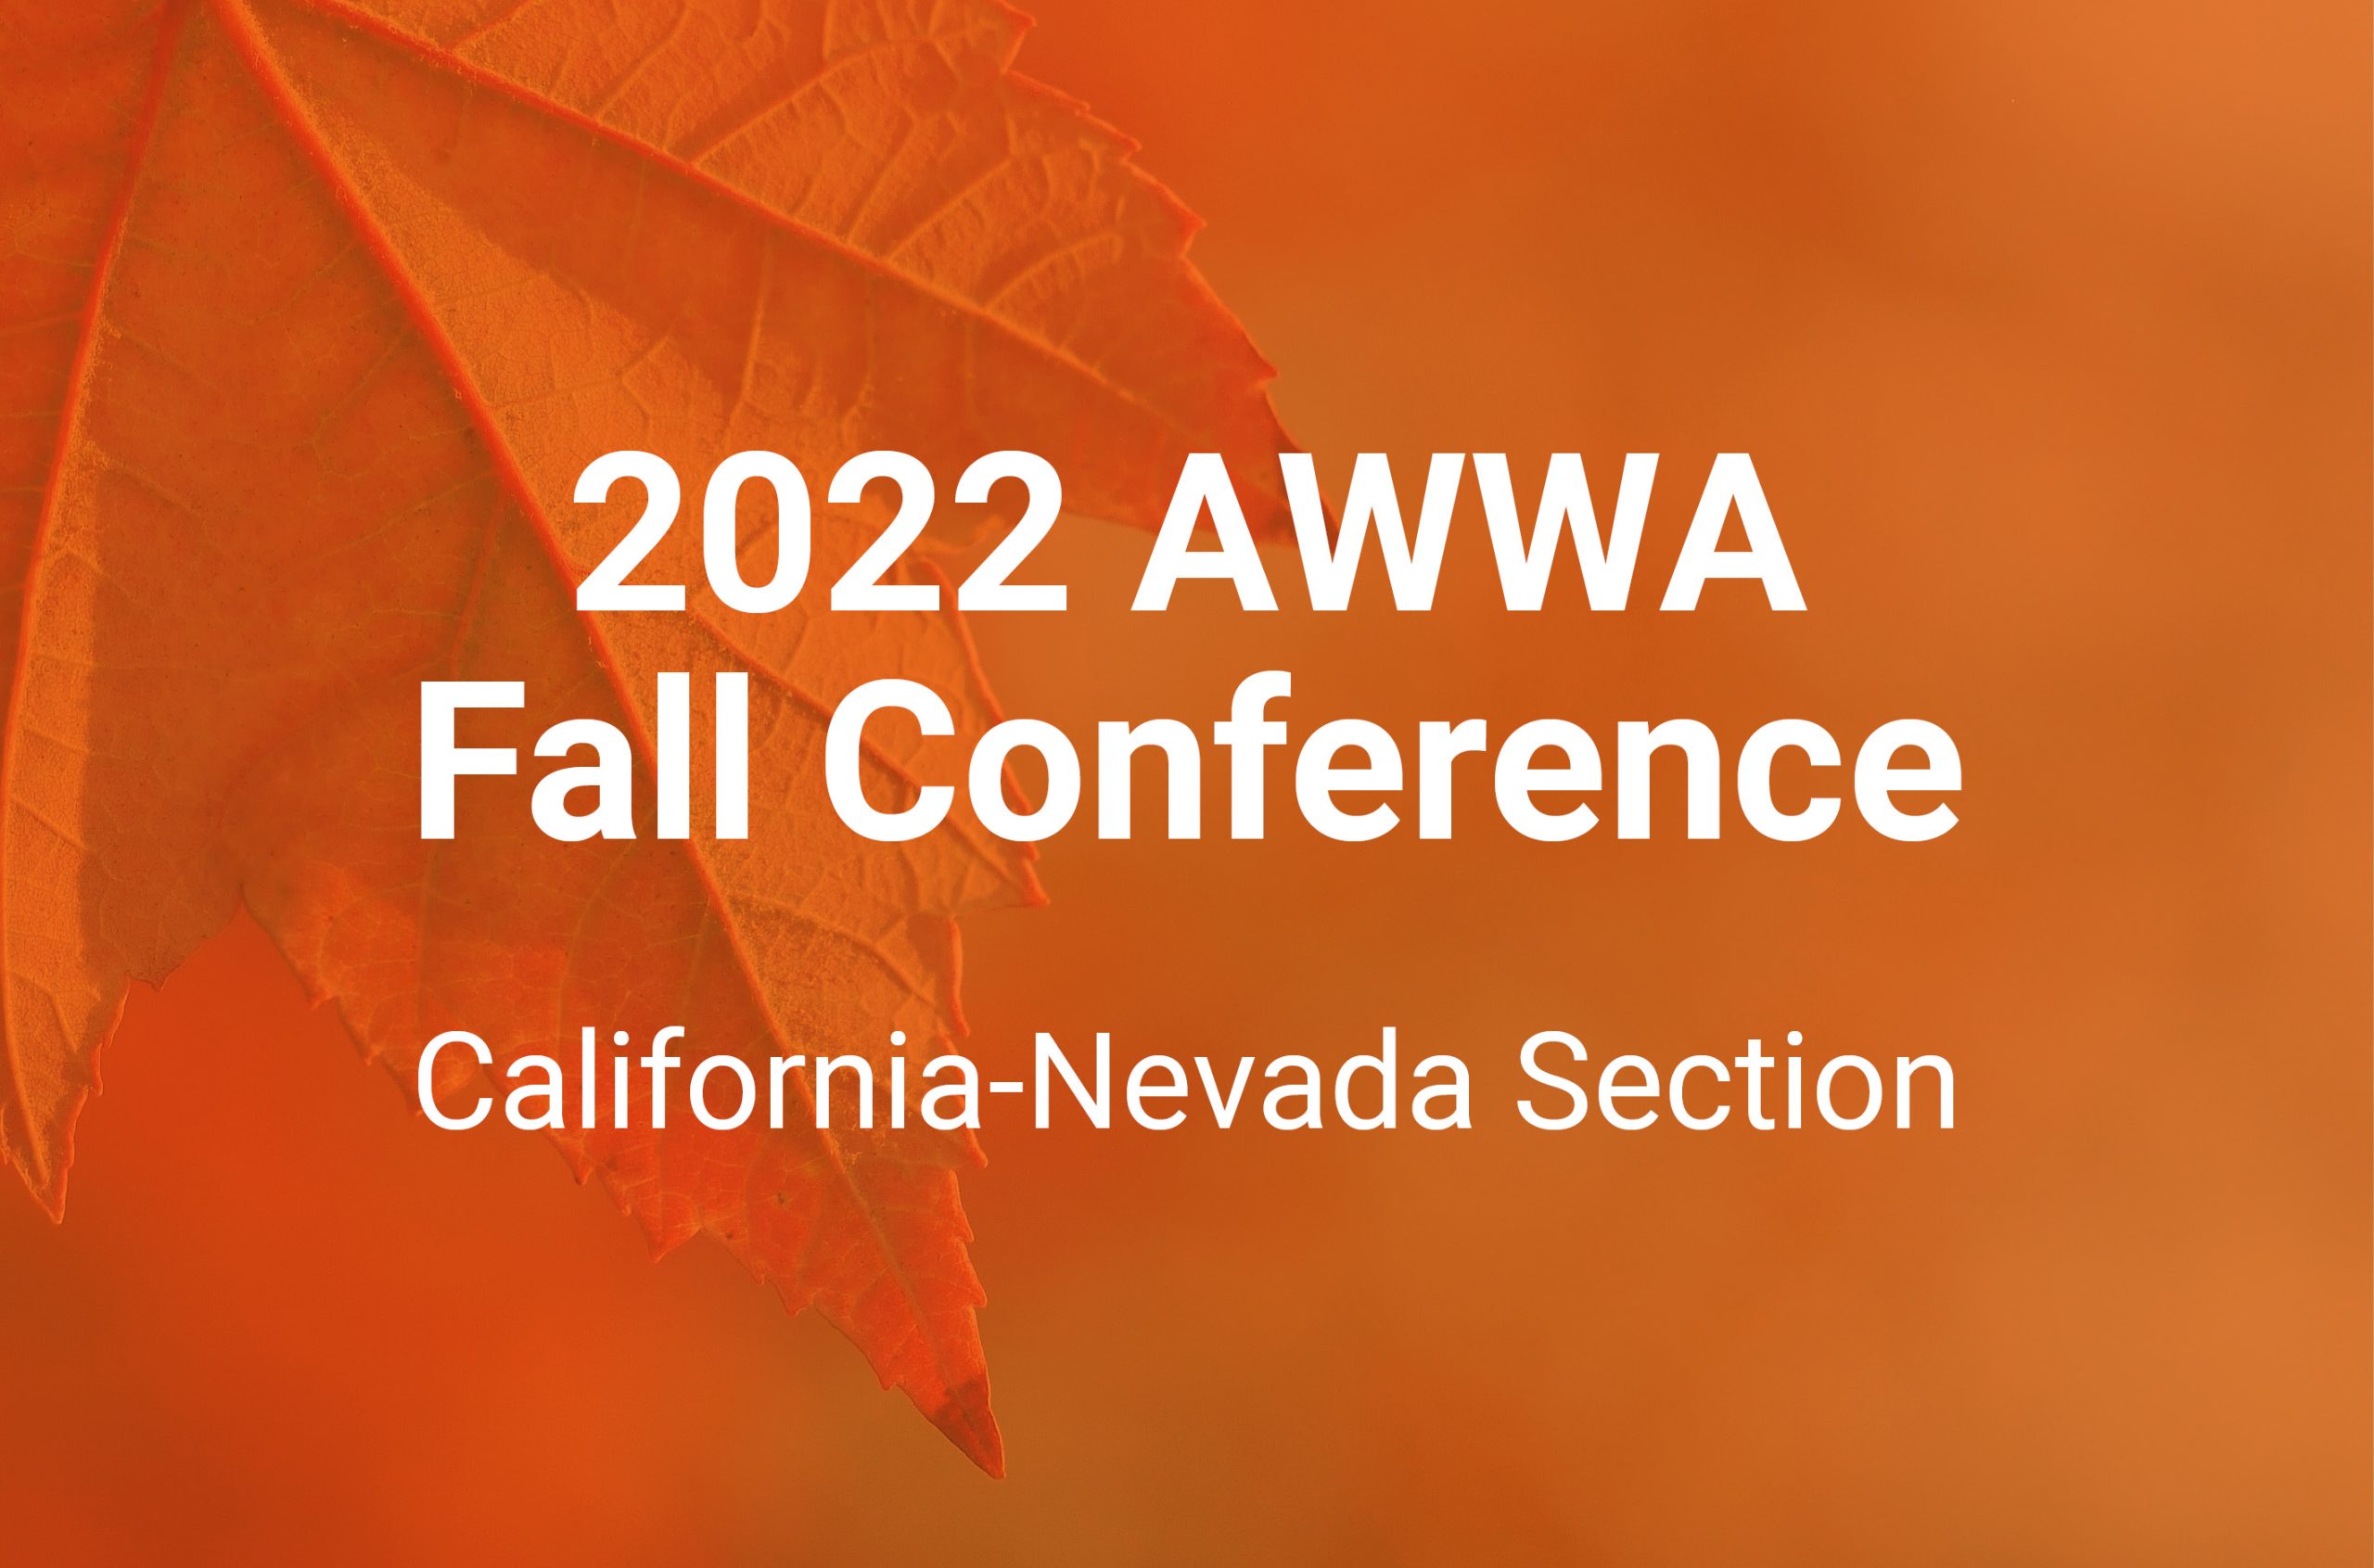 KJ Presents at the 2022 AWWA Fall Conference for the CaliforniaNevada